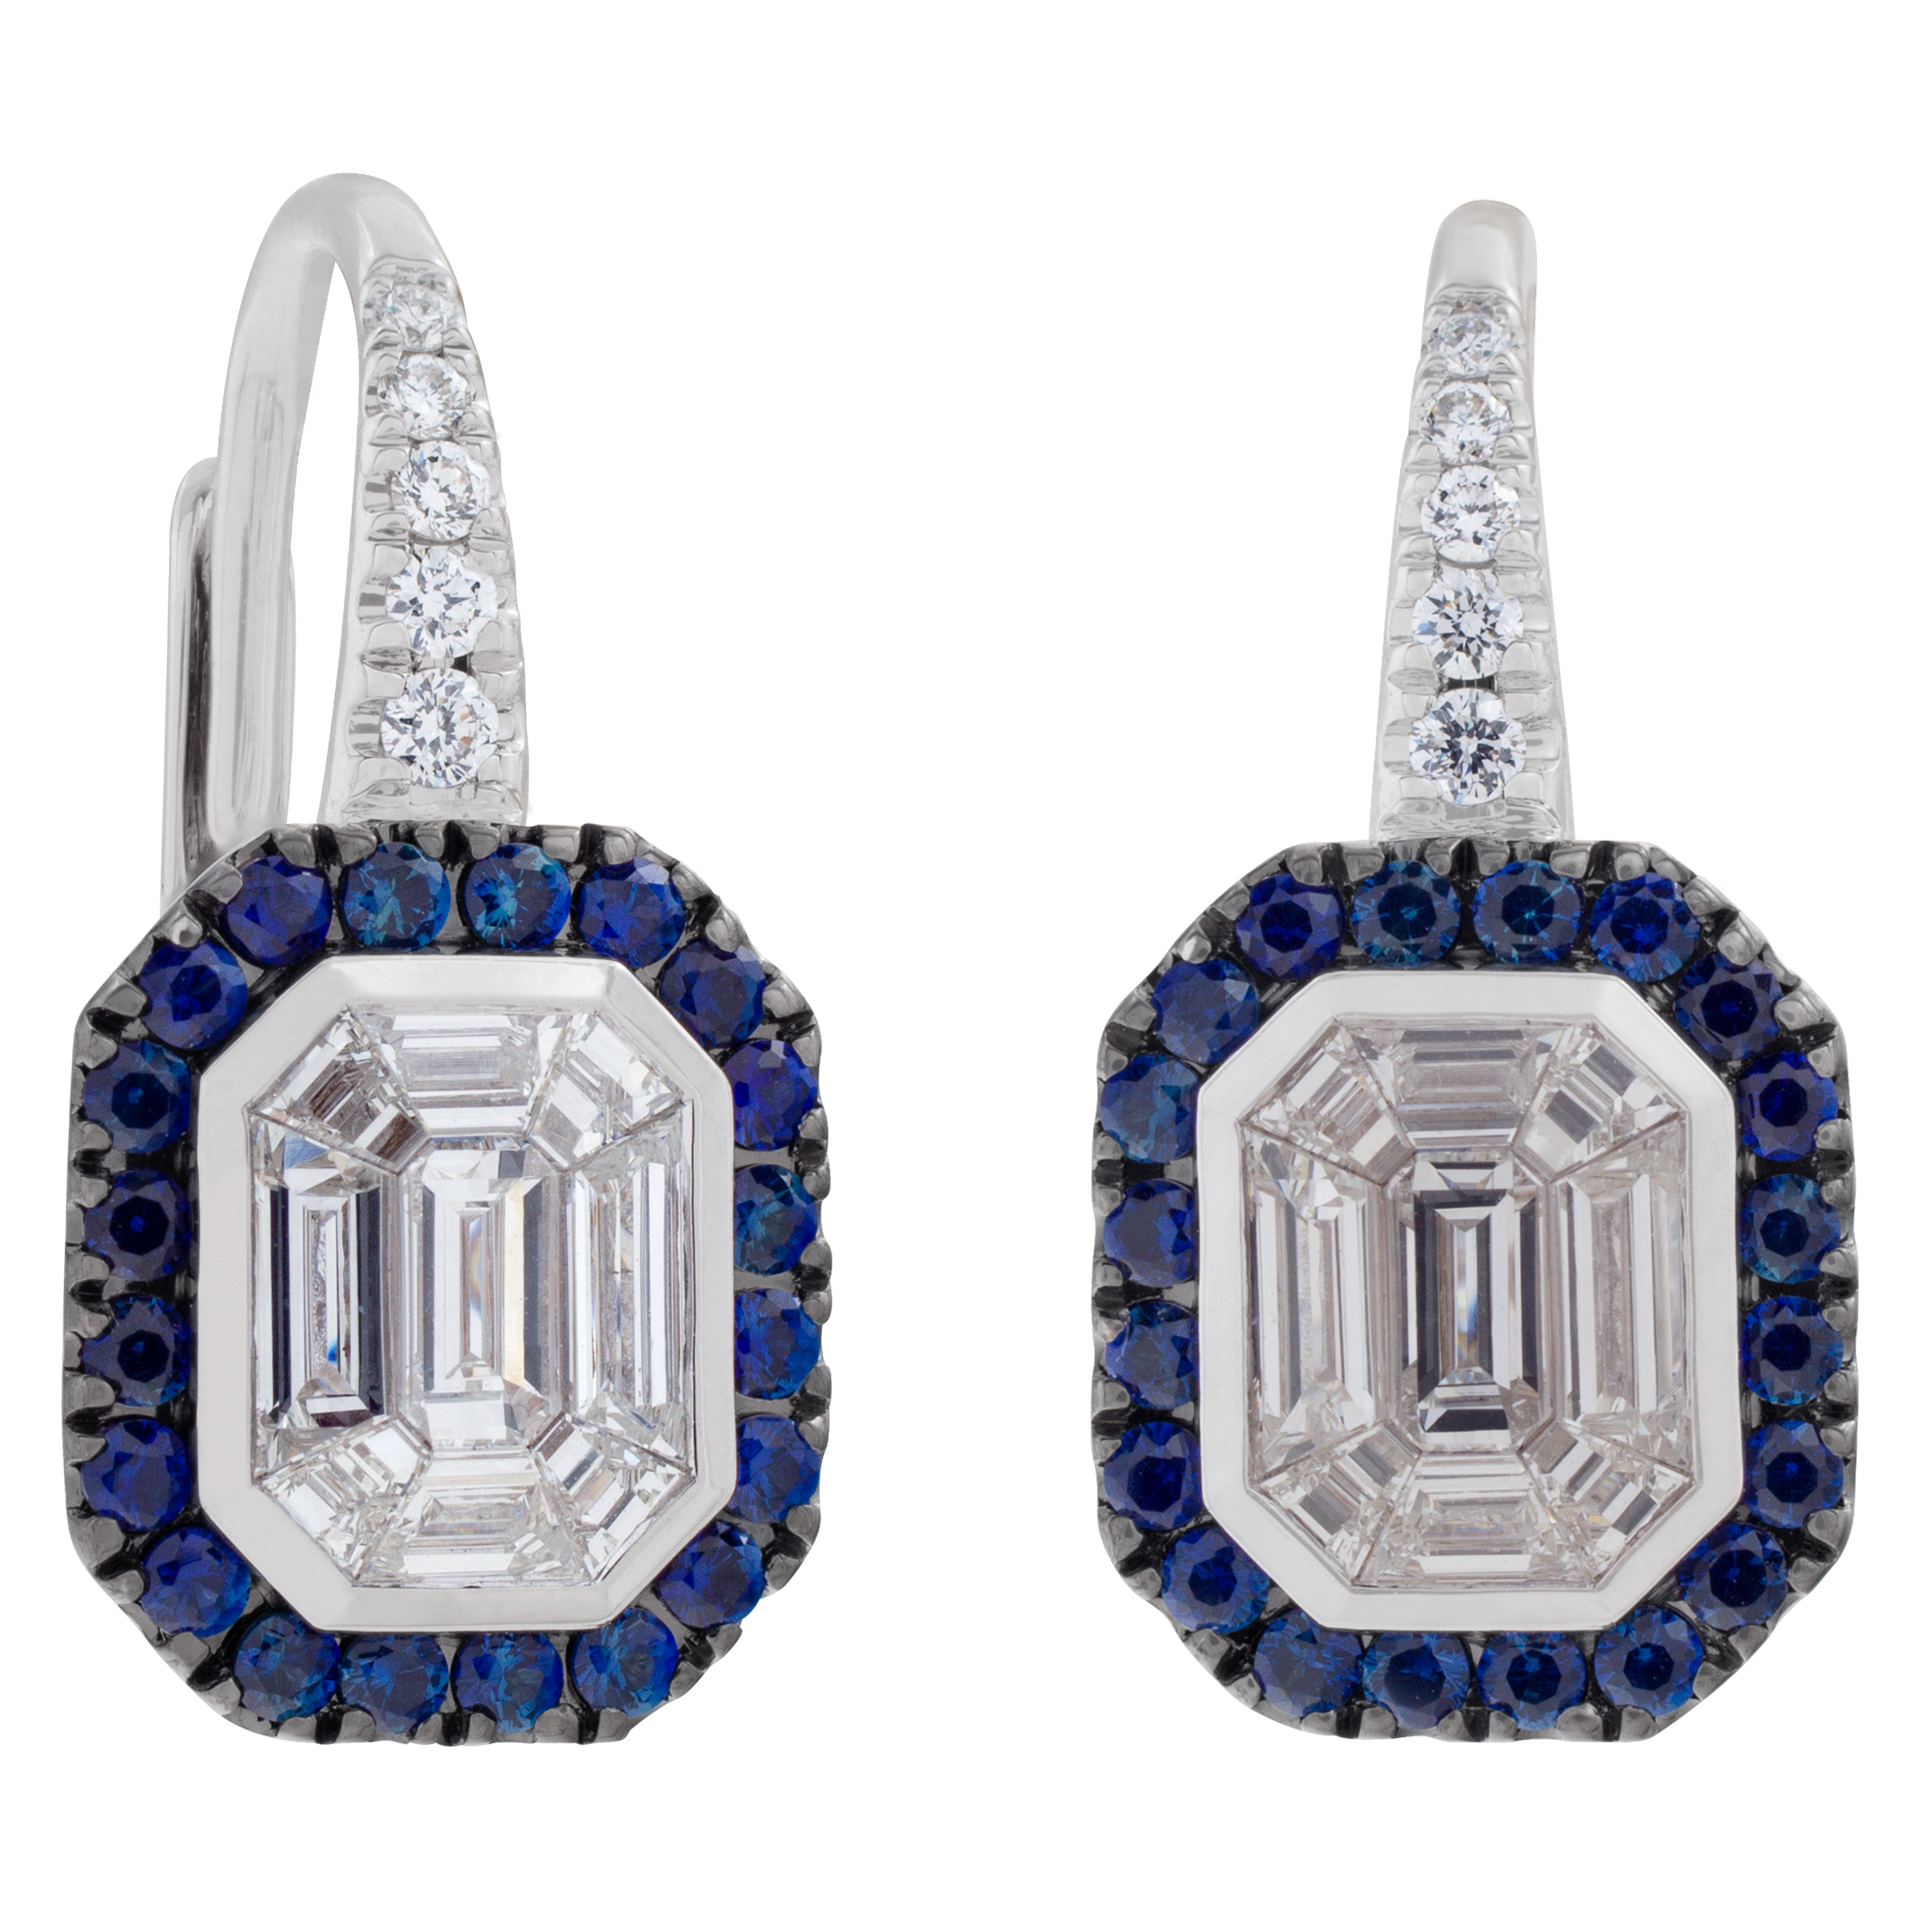 Diamond and sapphire clip earrings in 18k white gold